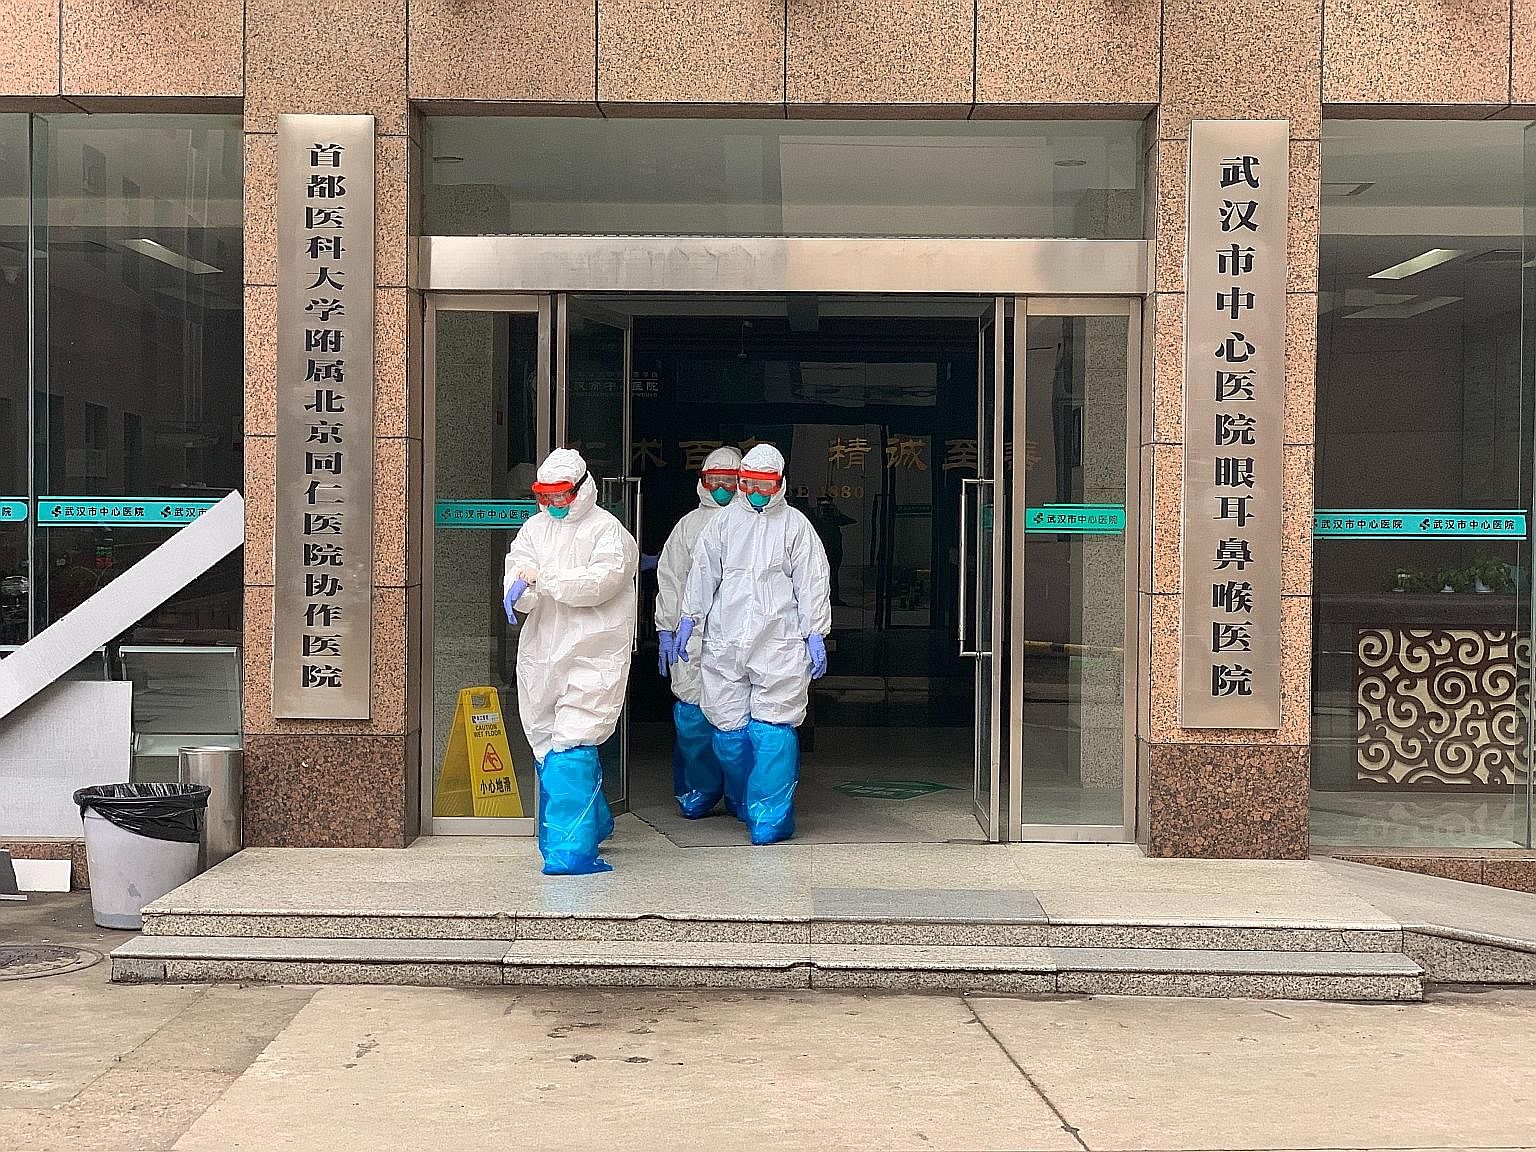 Medical professionals at hospitals in Wuhan have been fighting the coronavirus outbreak for more than a month. In some hospitals, all medical workers have given up their holidays, working in shifts to keep the intensive care unit (ICU) running at ful